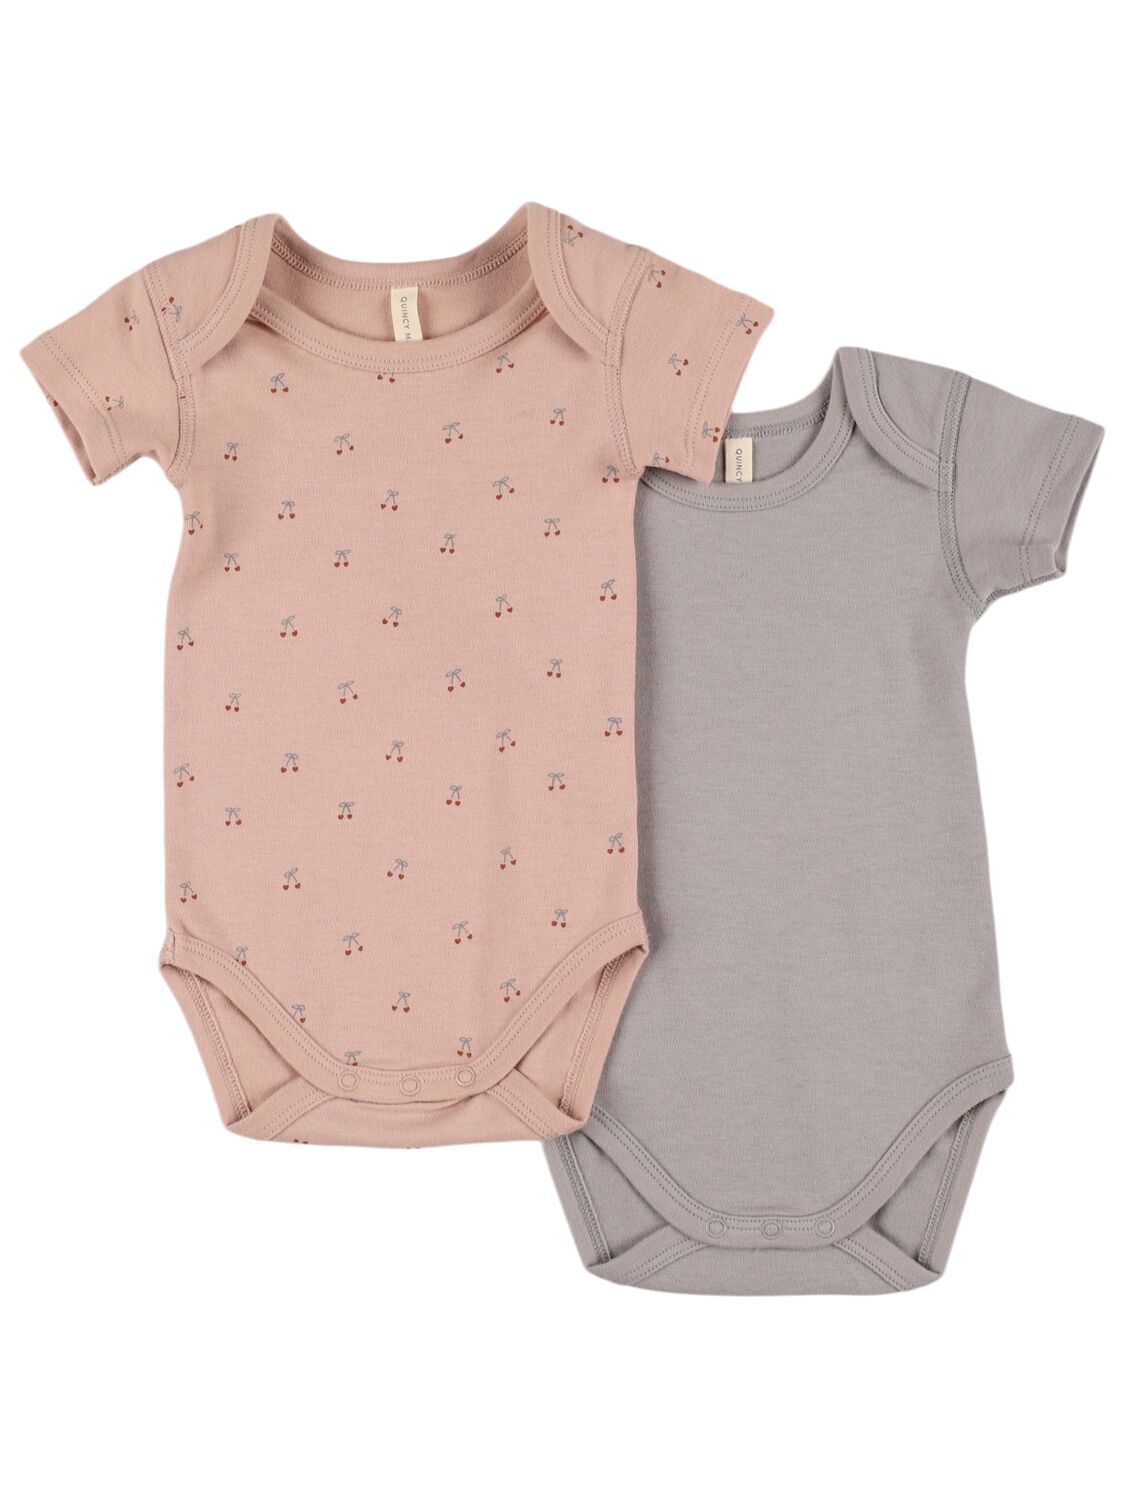 Quincy Mae Babies' Set Of 2 Organic Cotton Bodysuits In Multi